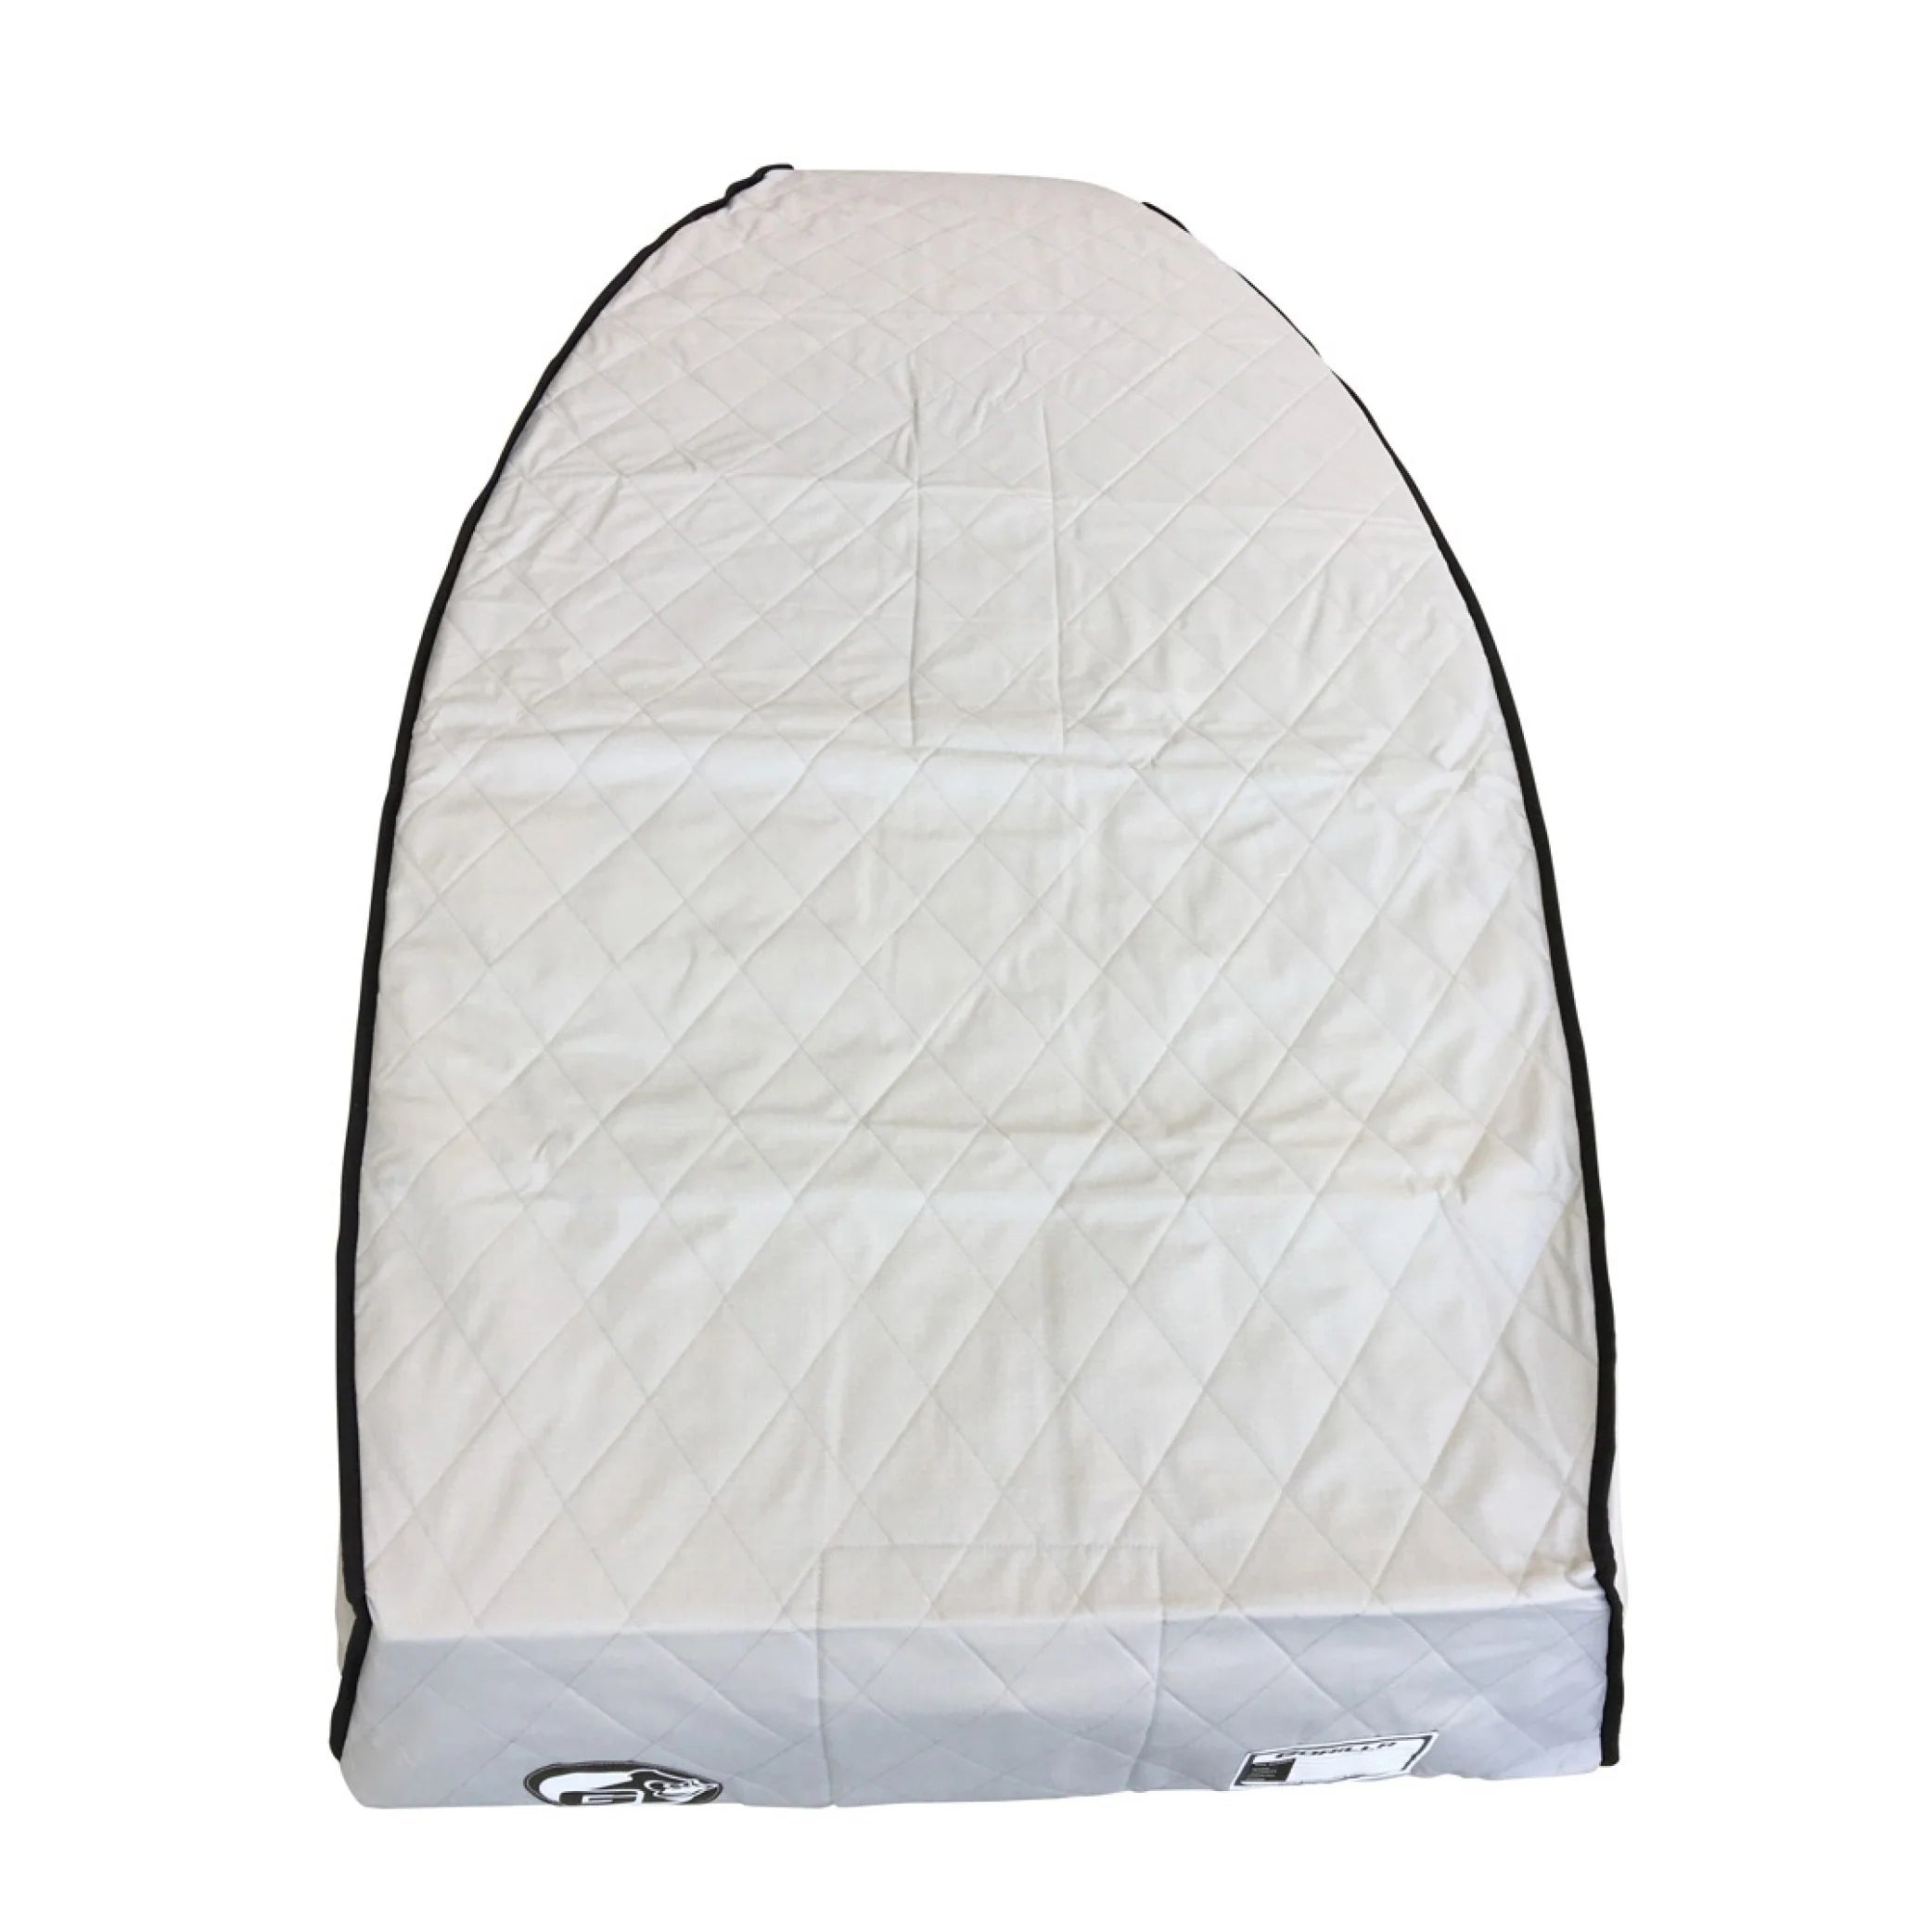 Optimist "Hydrolite" Quilted Hull cover